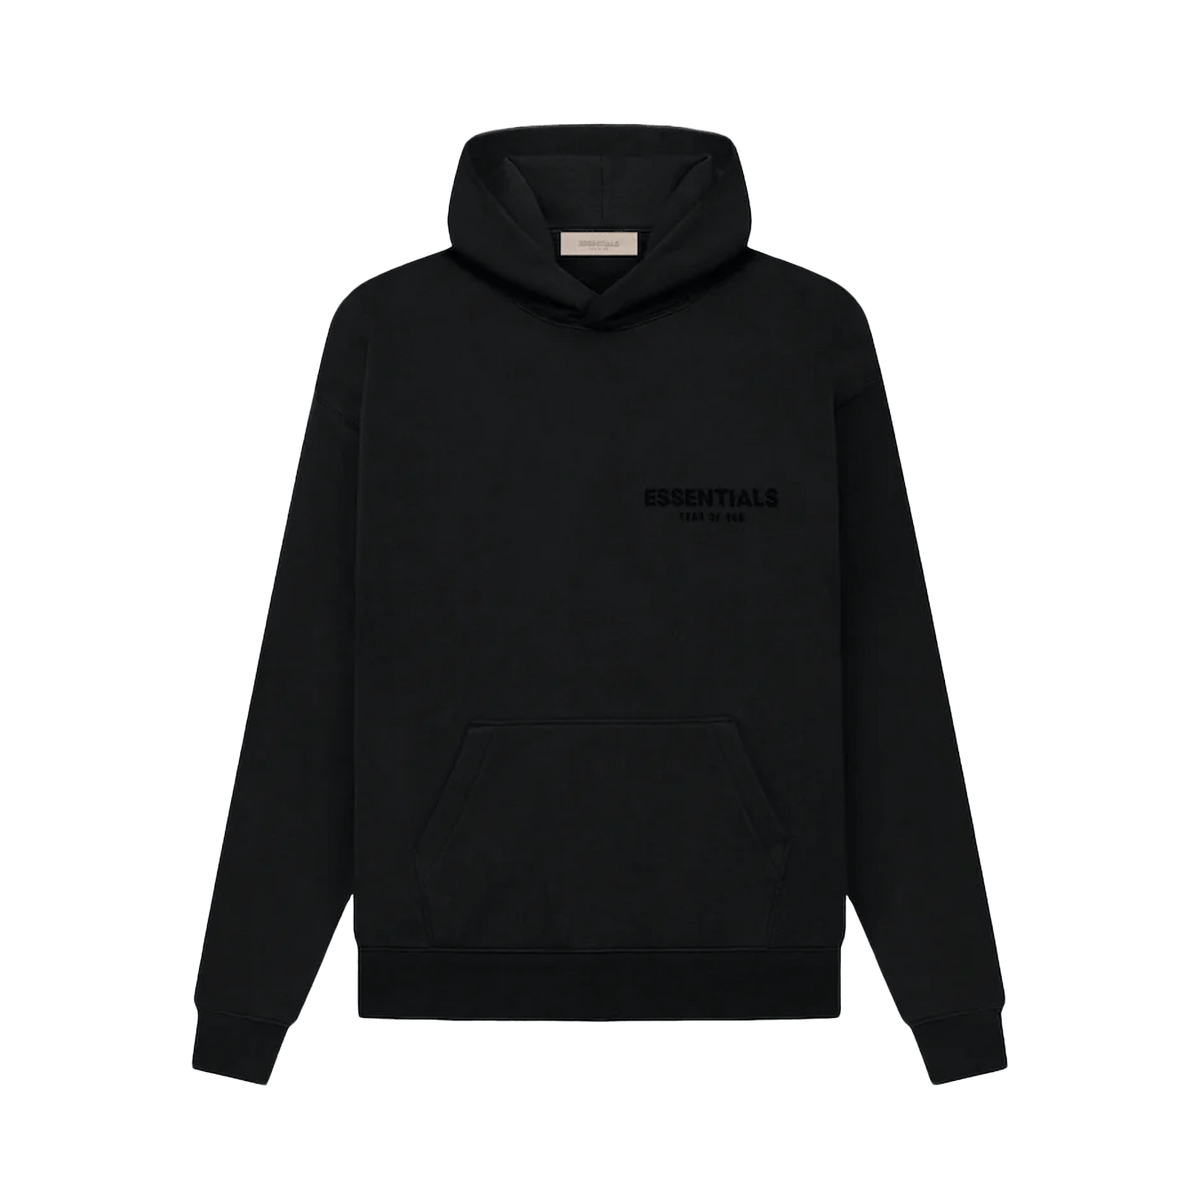 ugg telfar collab boots tote bag hoodies fall 2021 release Essentials Hoodie 'Stretch Limo' (SS22) - CerbeShops